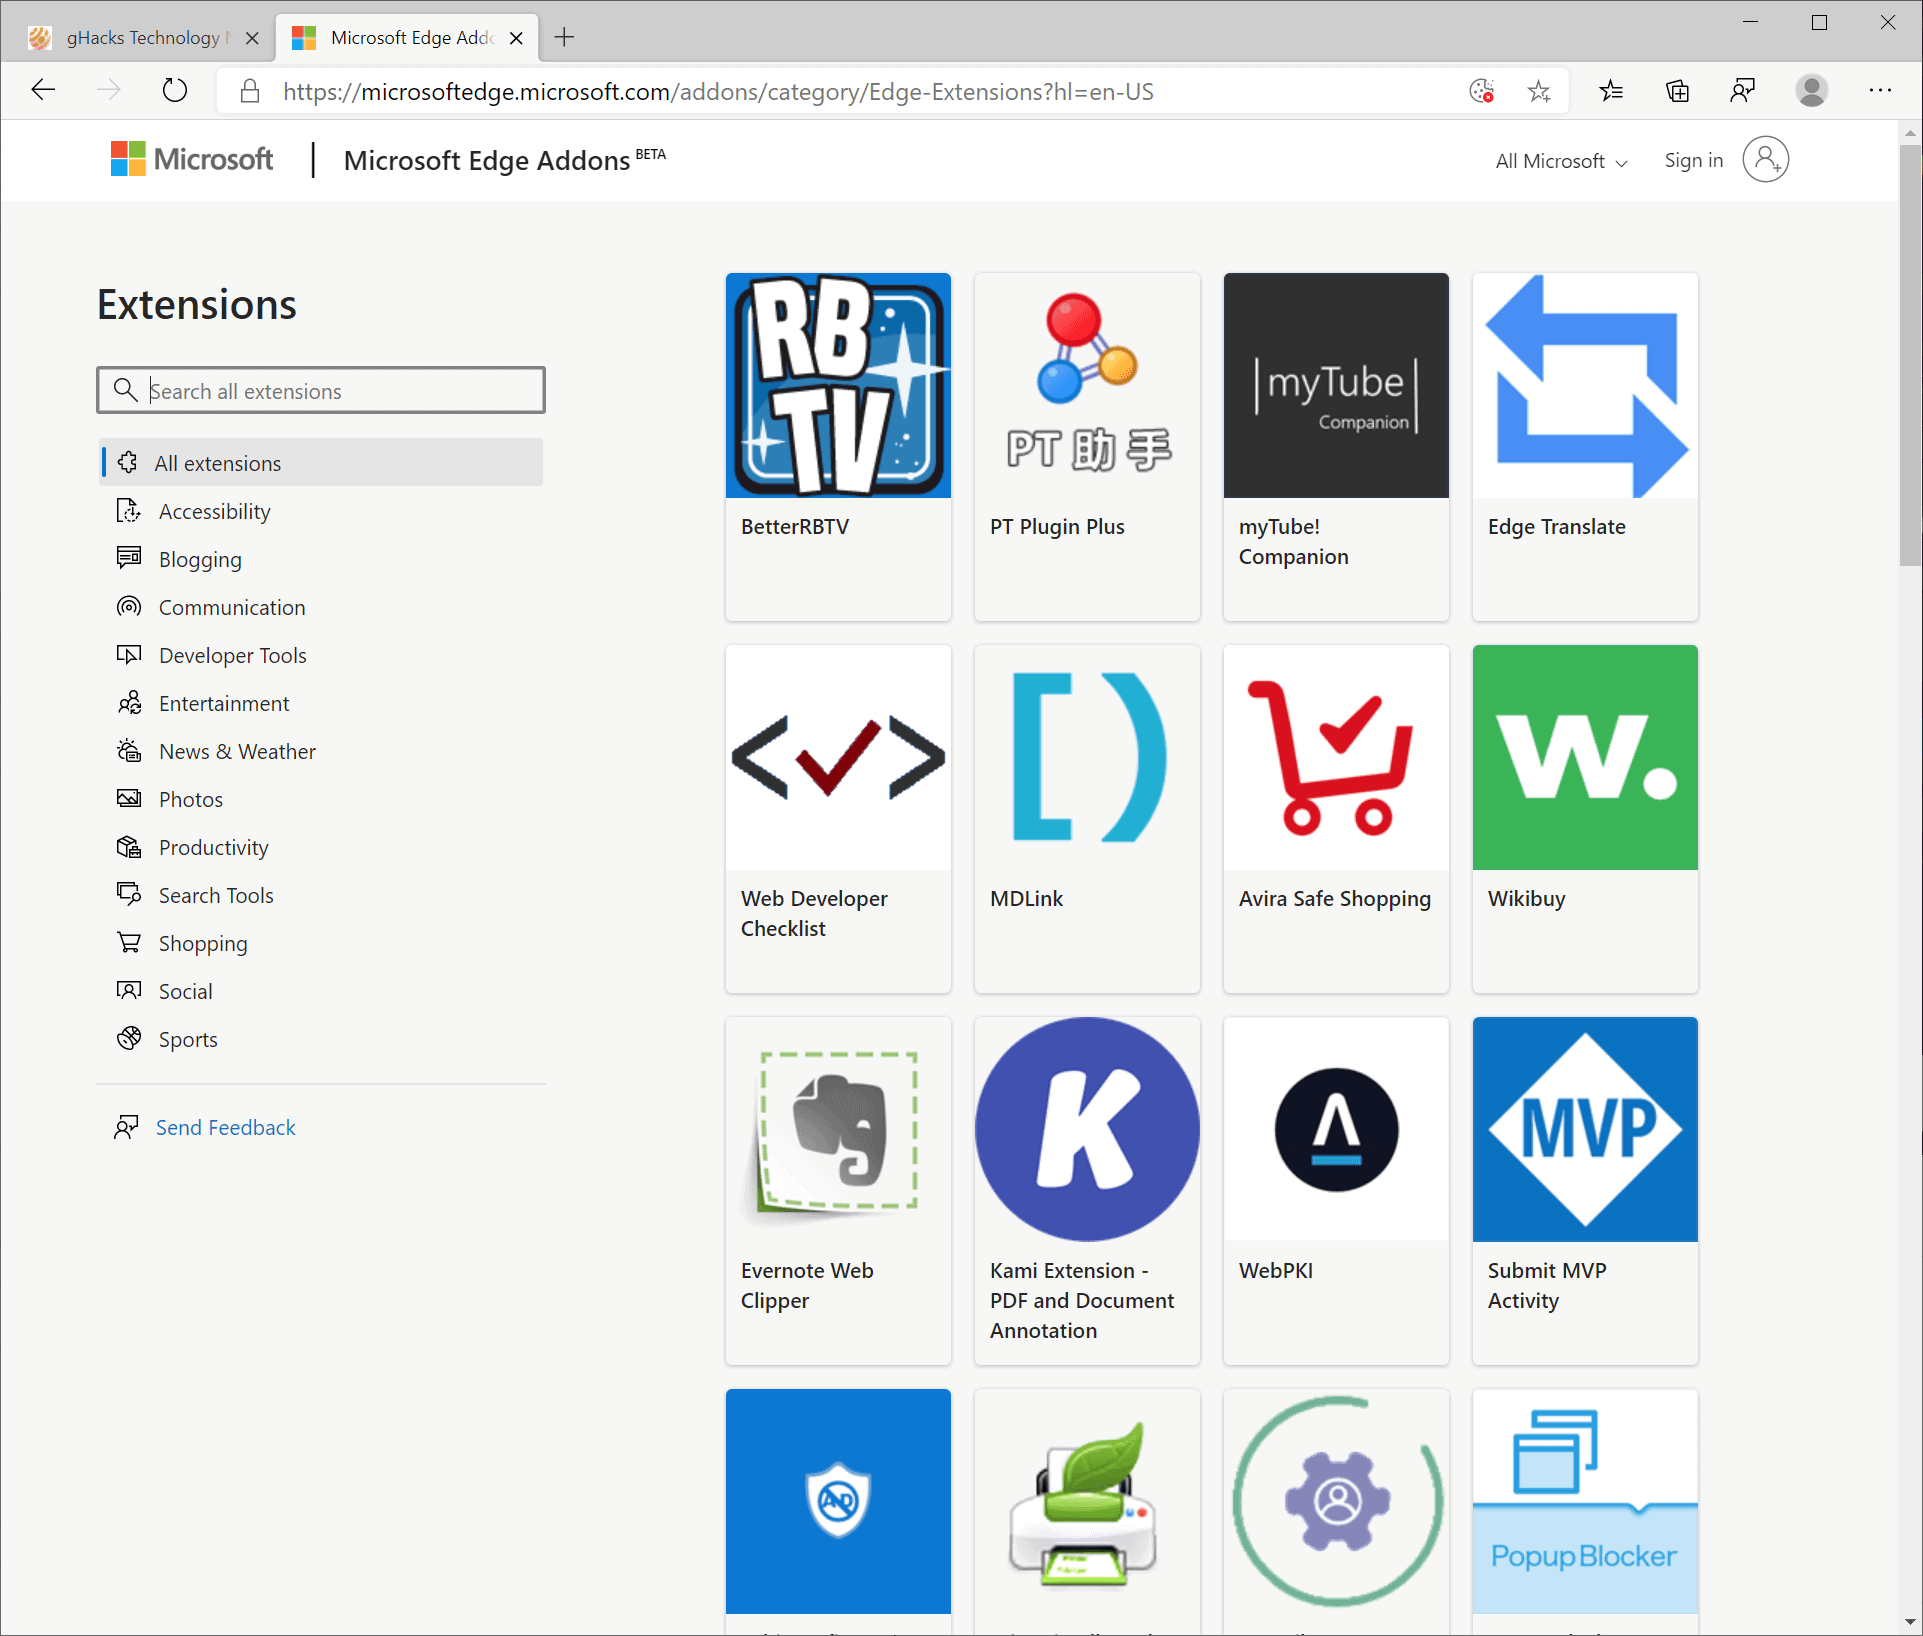 The Microsoft Edge extension store is finally getting some traction